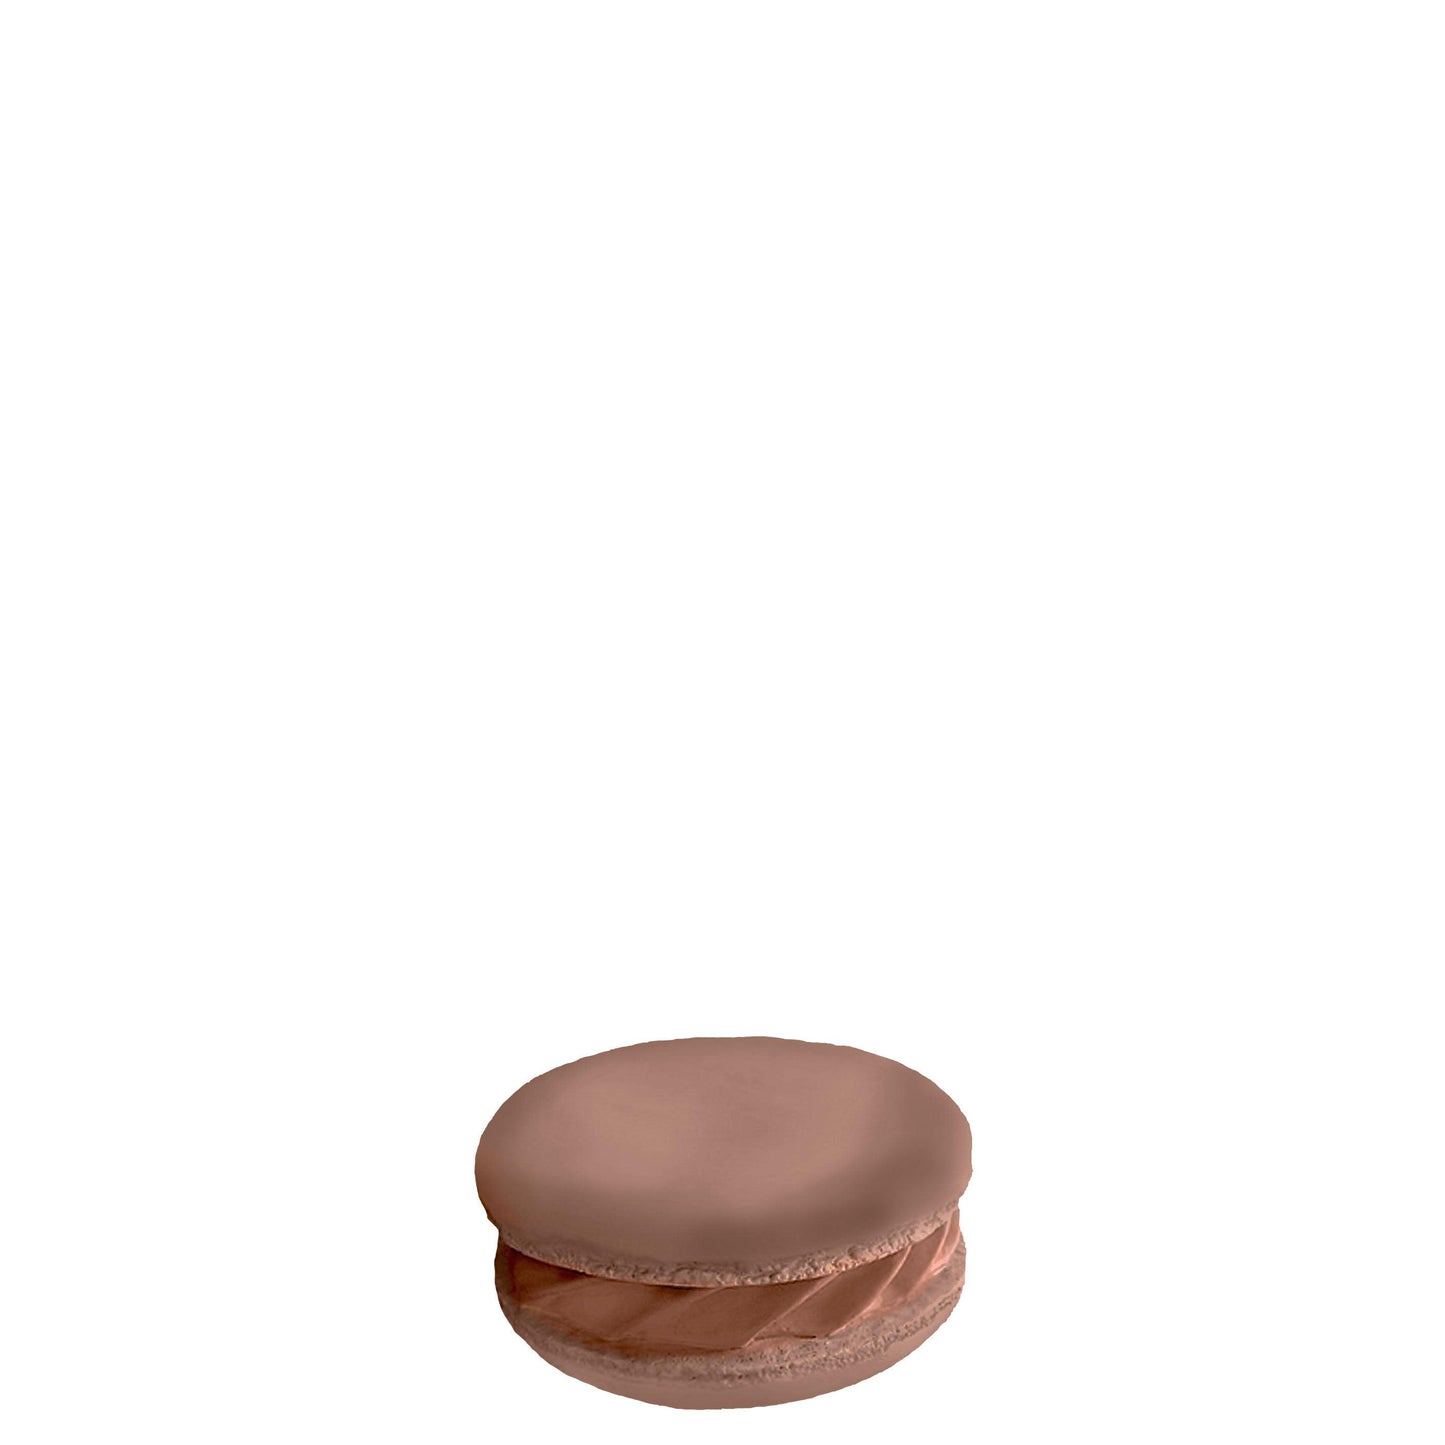 Small Brown Macaroon Statue